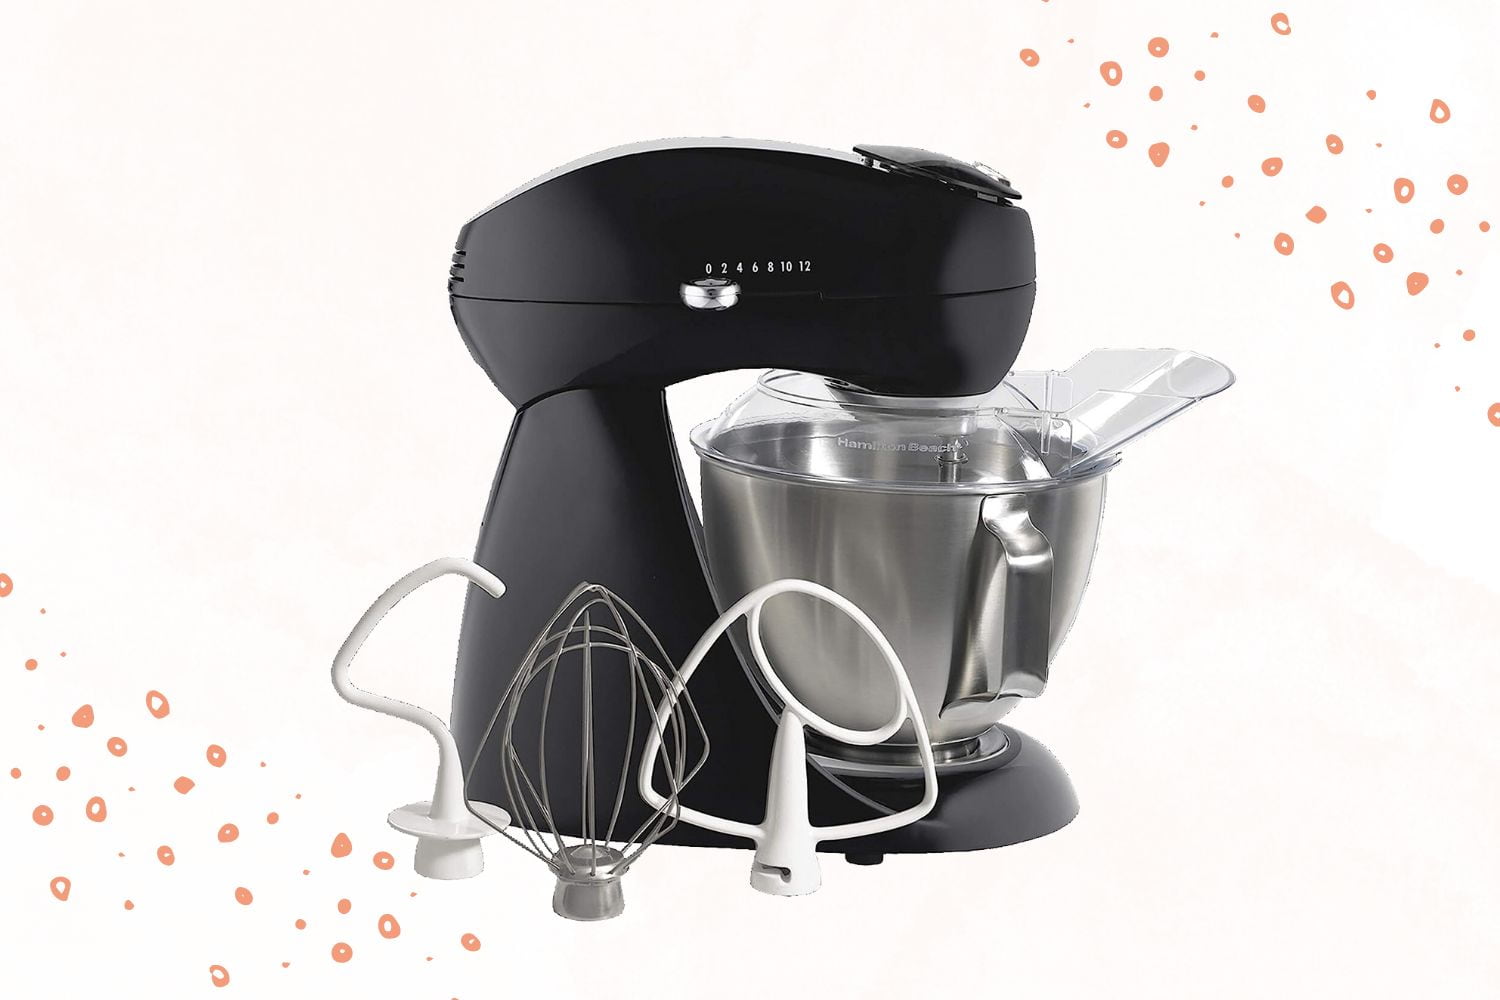 Hamilton Beach All-Metal 12-Speed Electric Stand Mixer: Best for Small Spaces